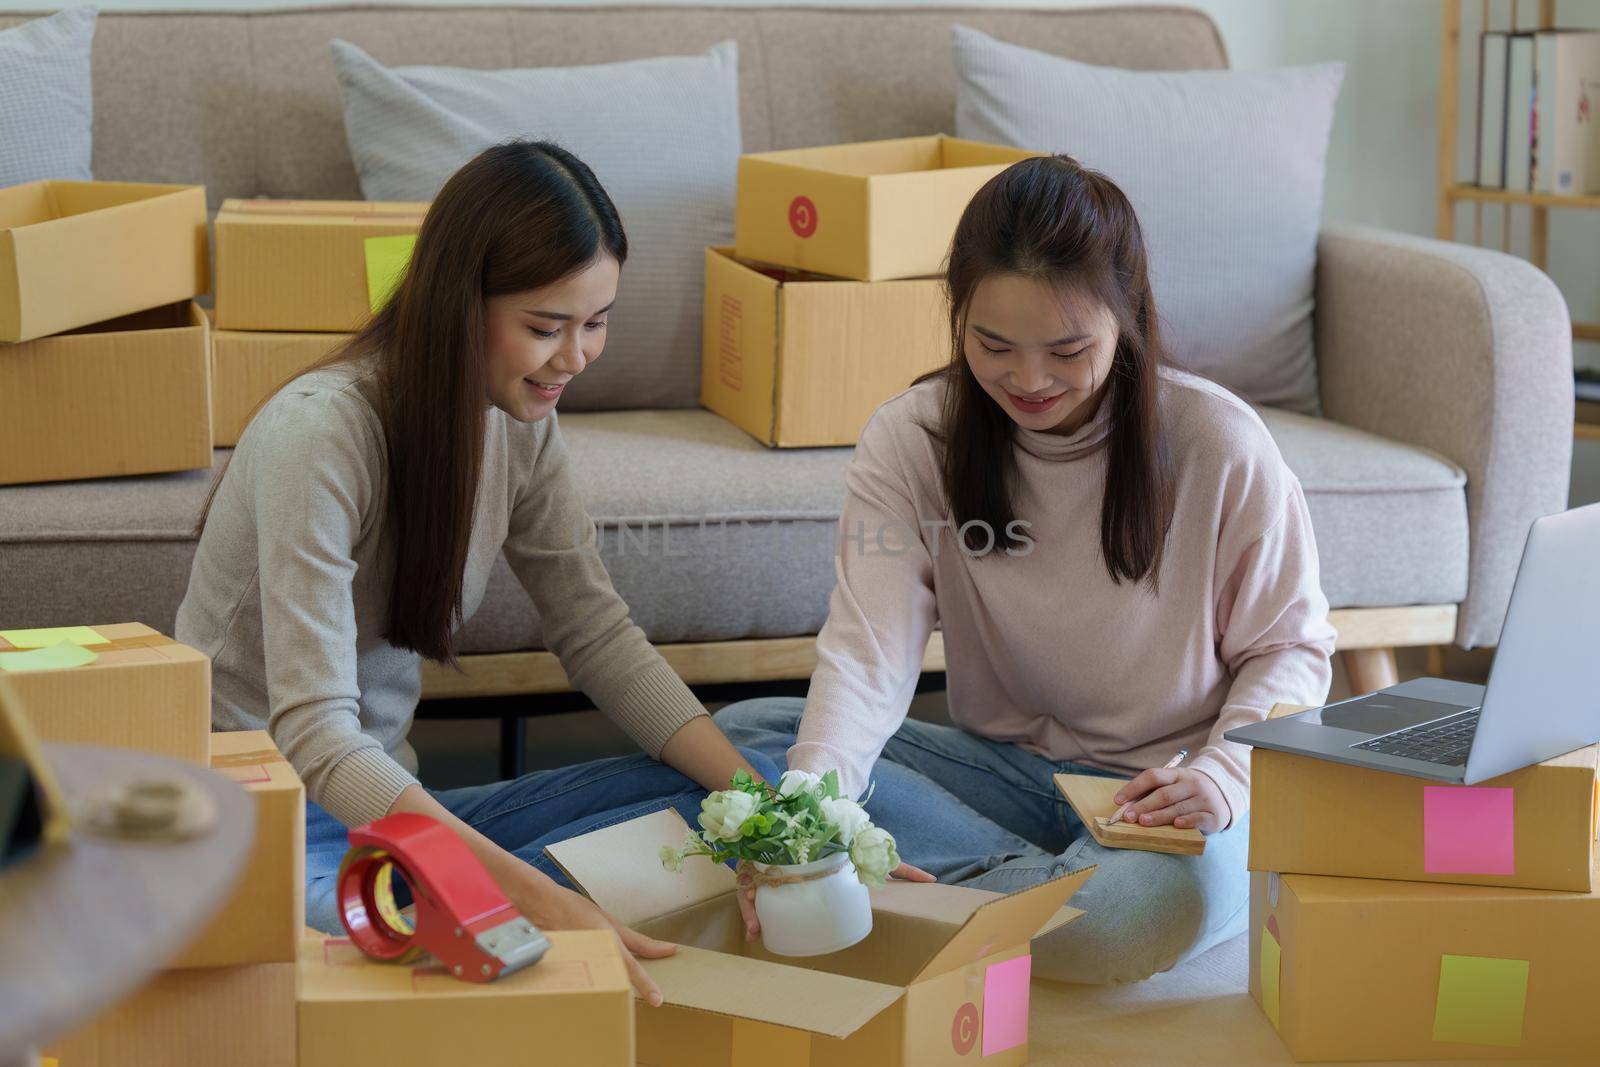 Asian SME business woman with partner working at home office. online shopping concept.